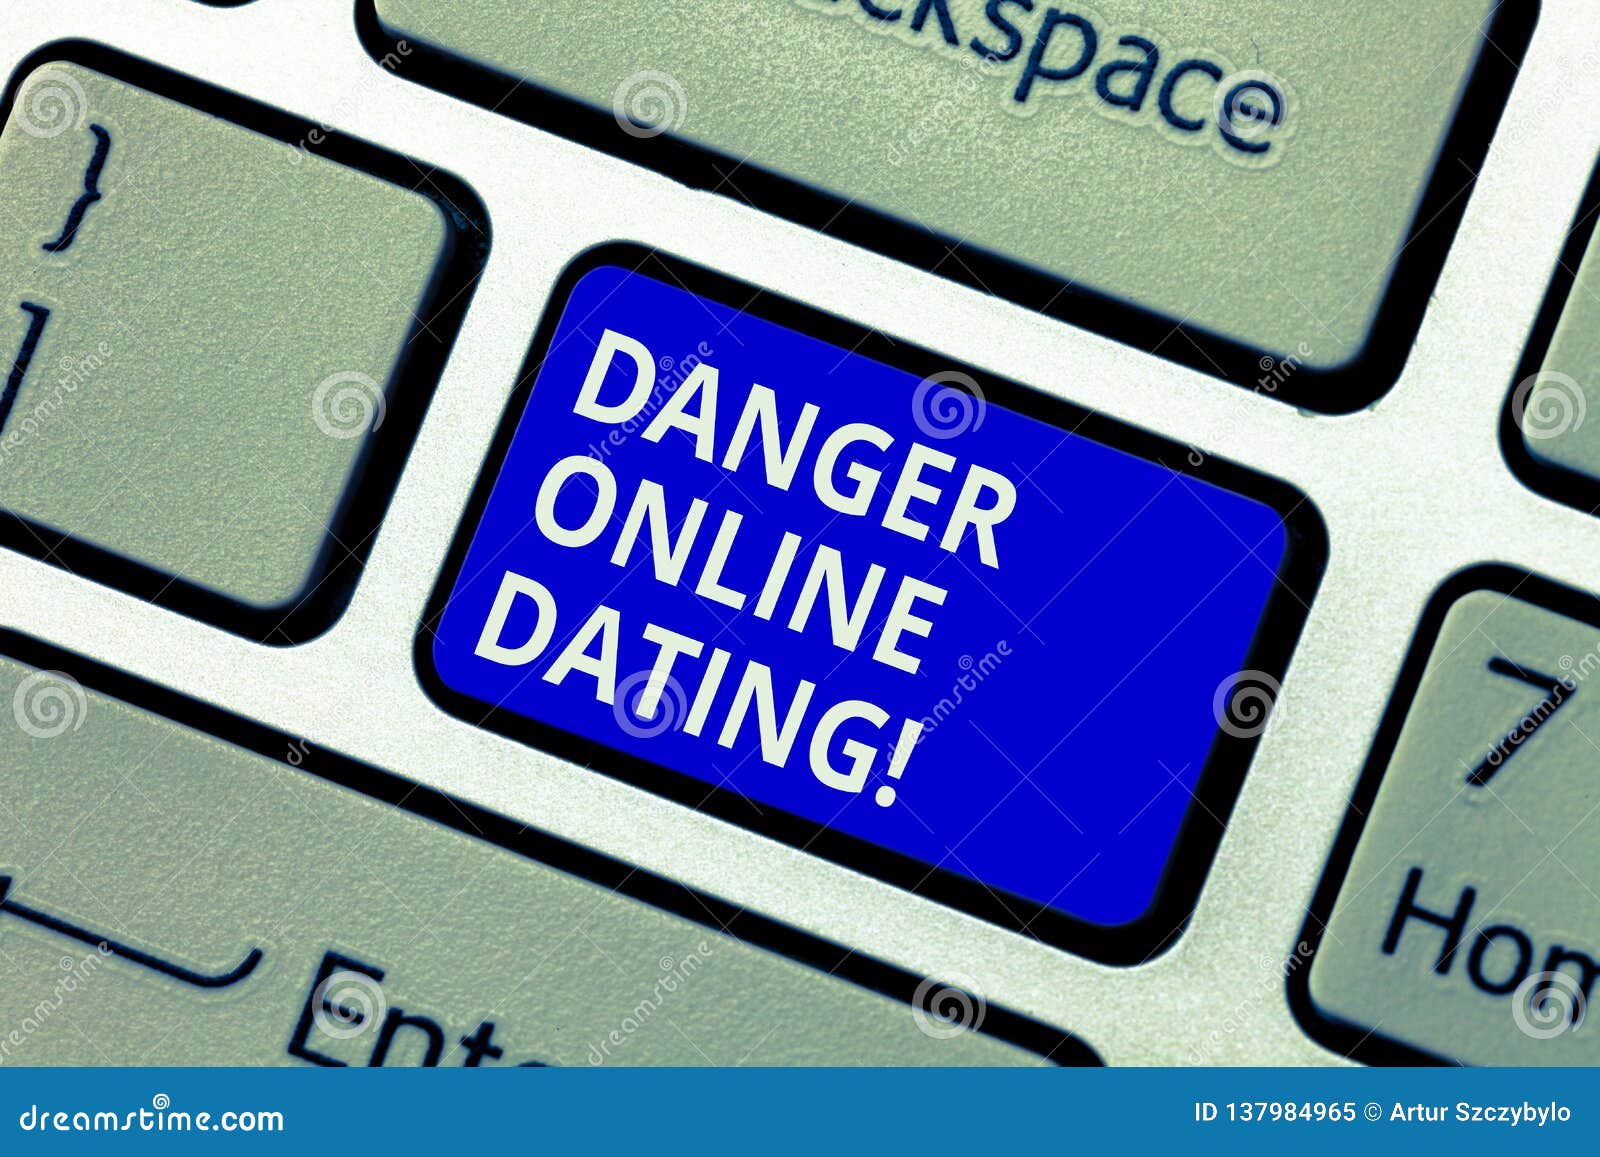 The Effects of Online Dating